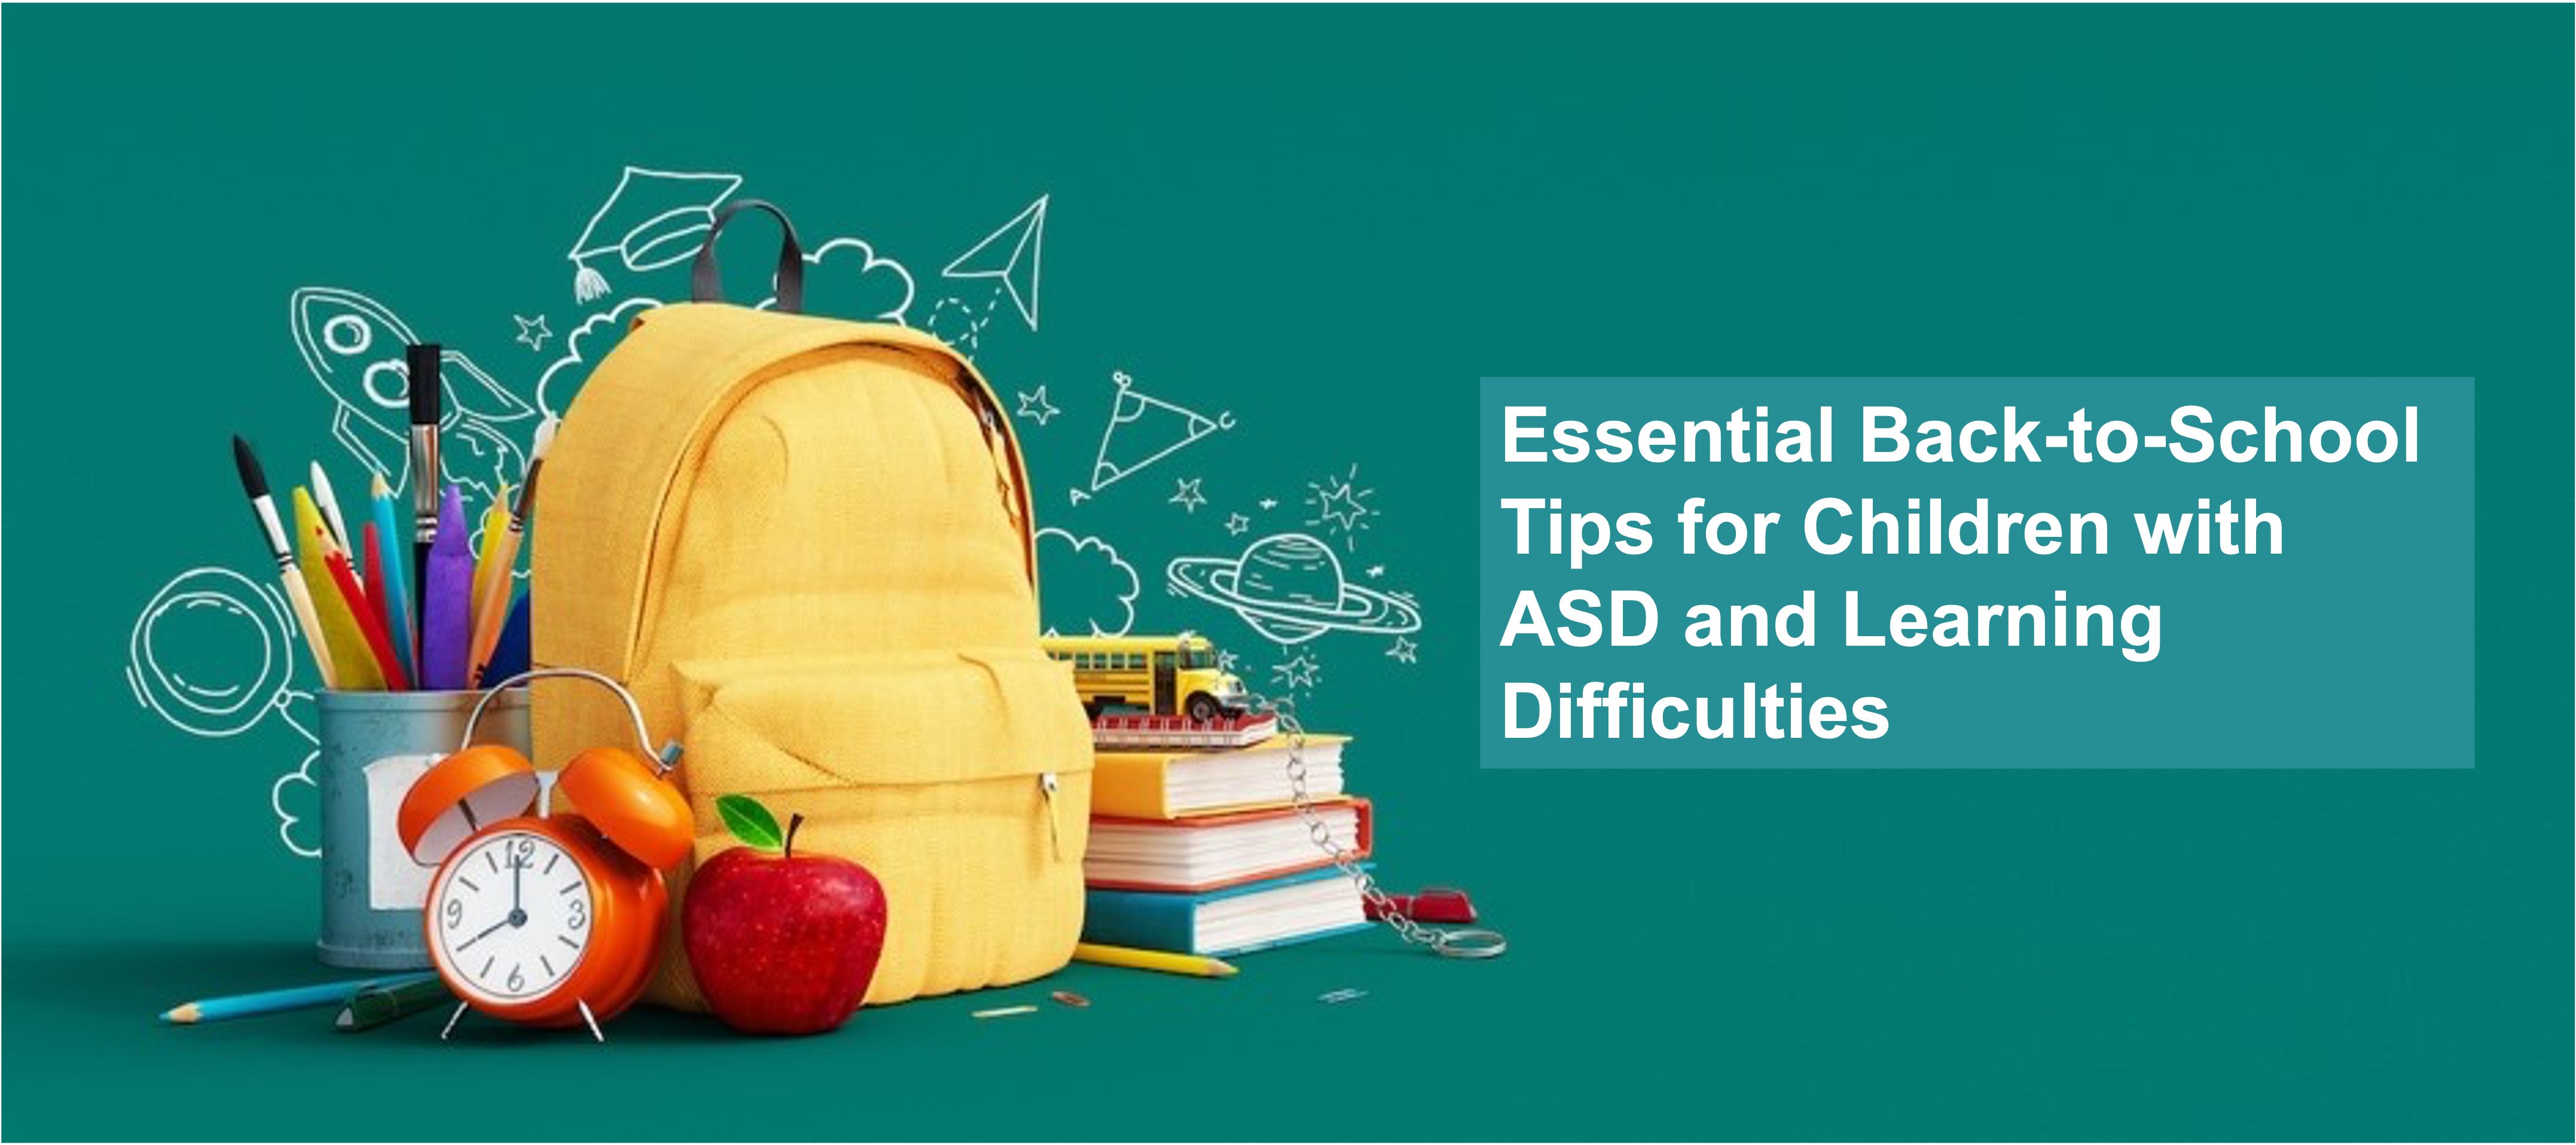 Essential Back-to-School Tips for Children with ASD and Learning Difficulties